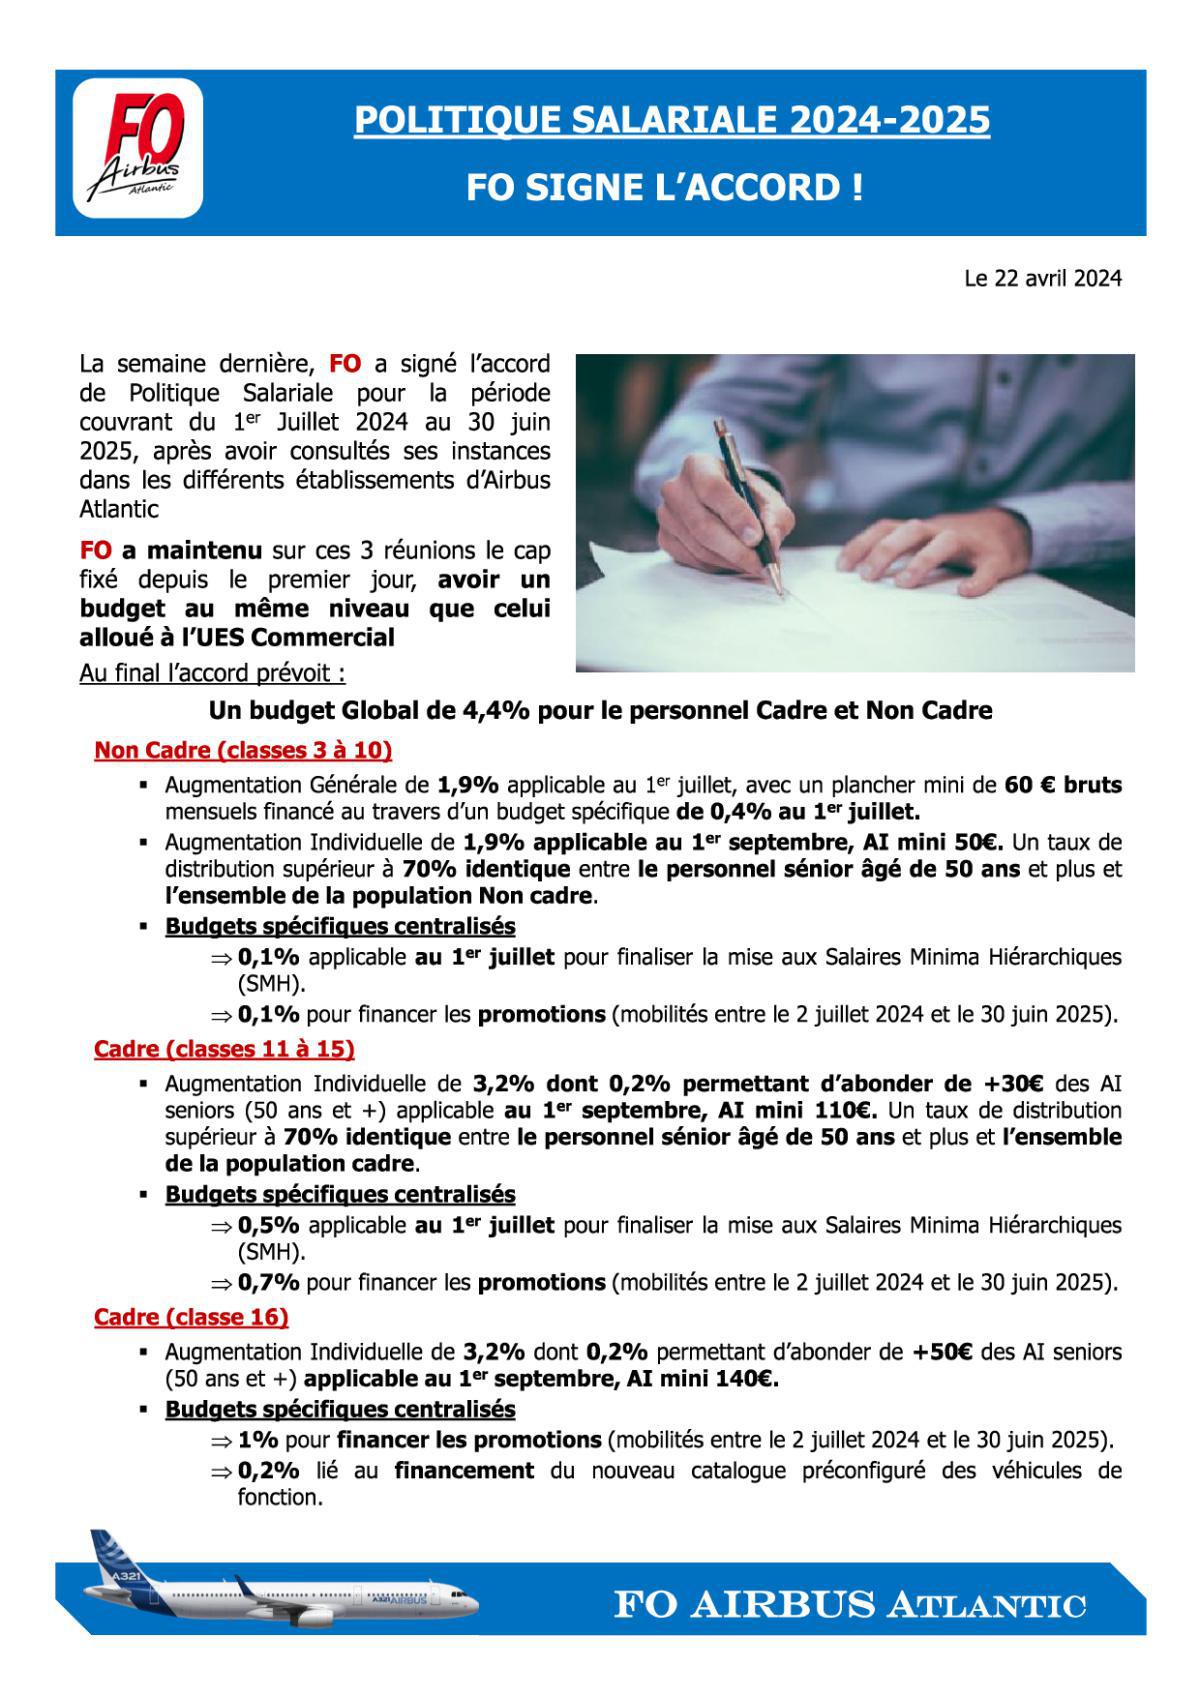 SALAIRES 2024-2025 : FO SIGNE L' ACCORD !